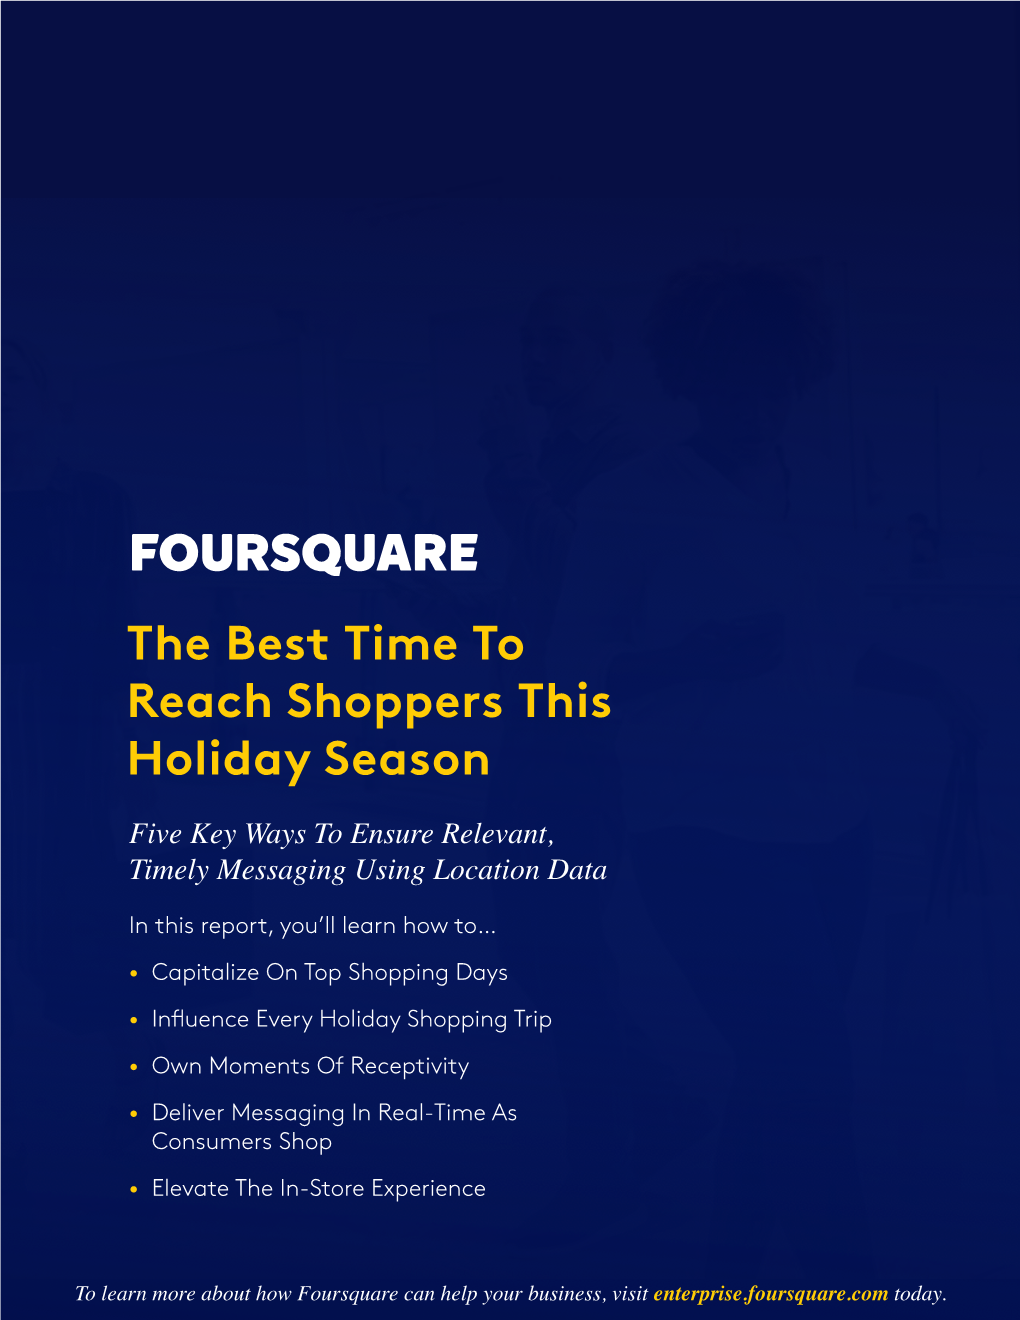 The Best Time to Reach Shoppers This Holiday Season Q2.2019